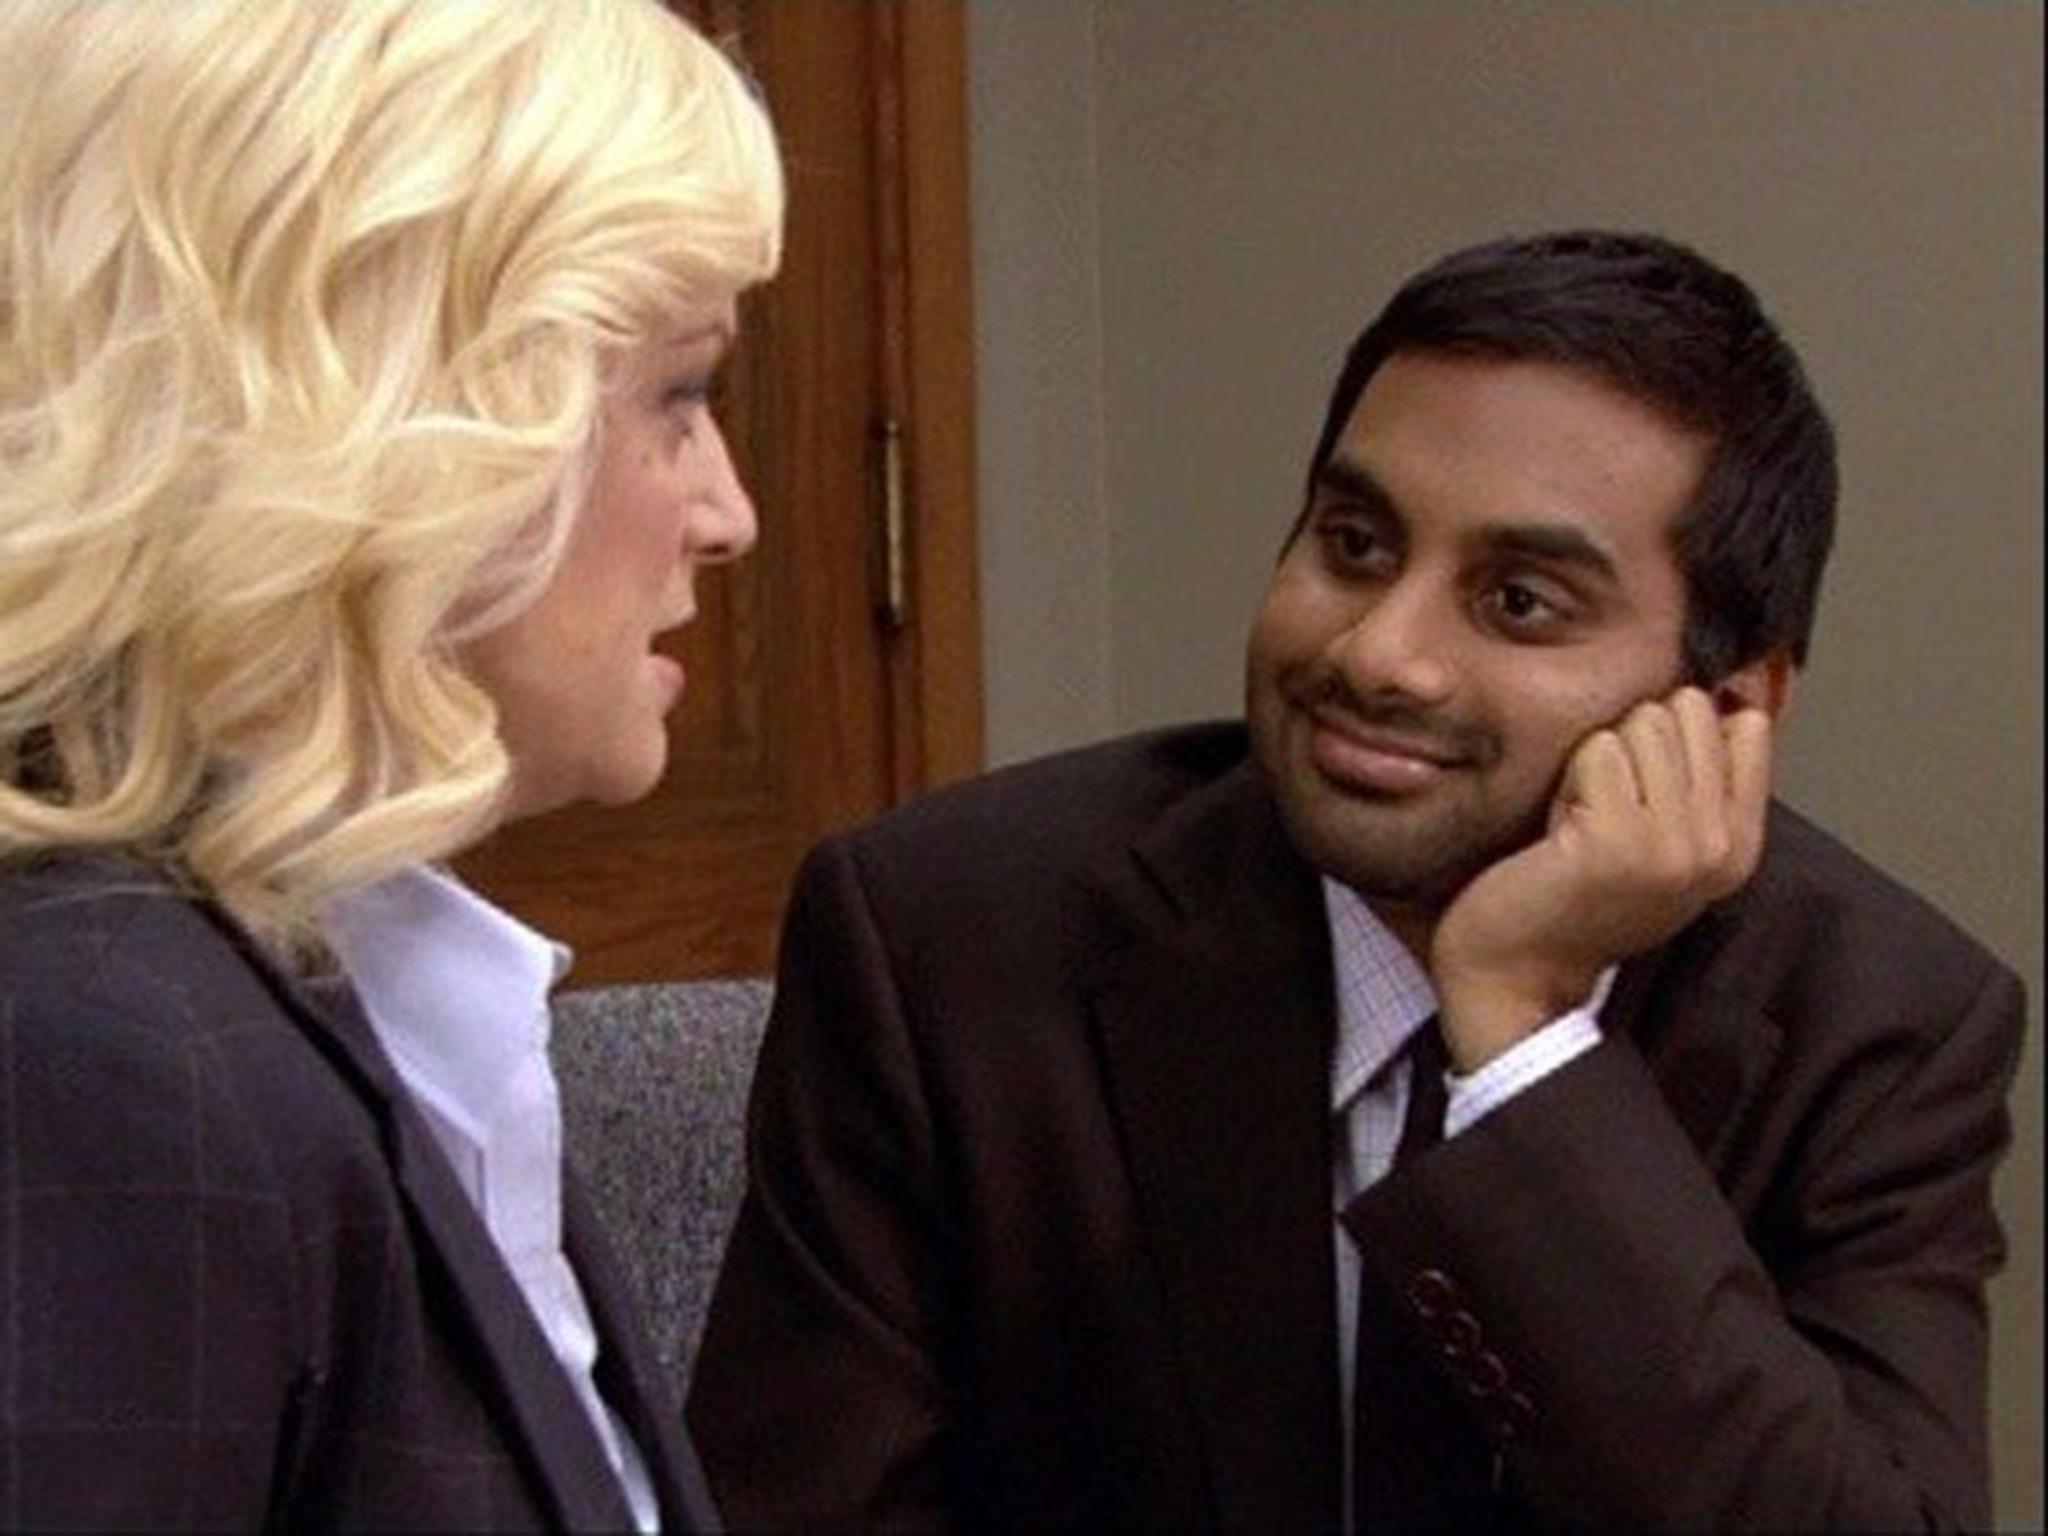 Ansari, who played Tom Haverford, says the writers and actors worked together to develop the characters